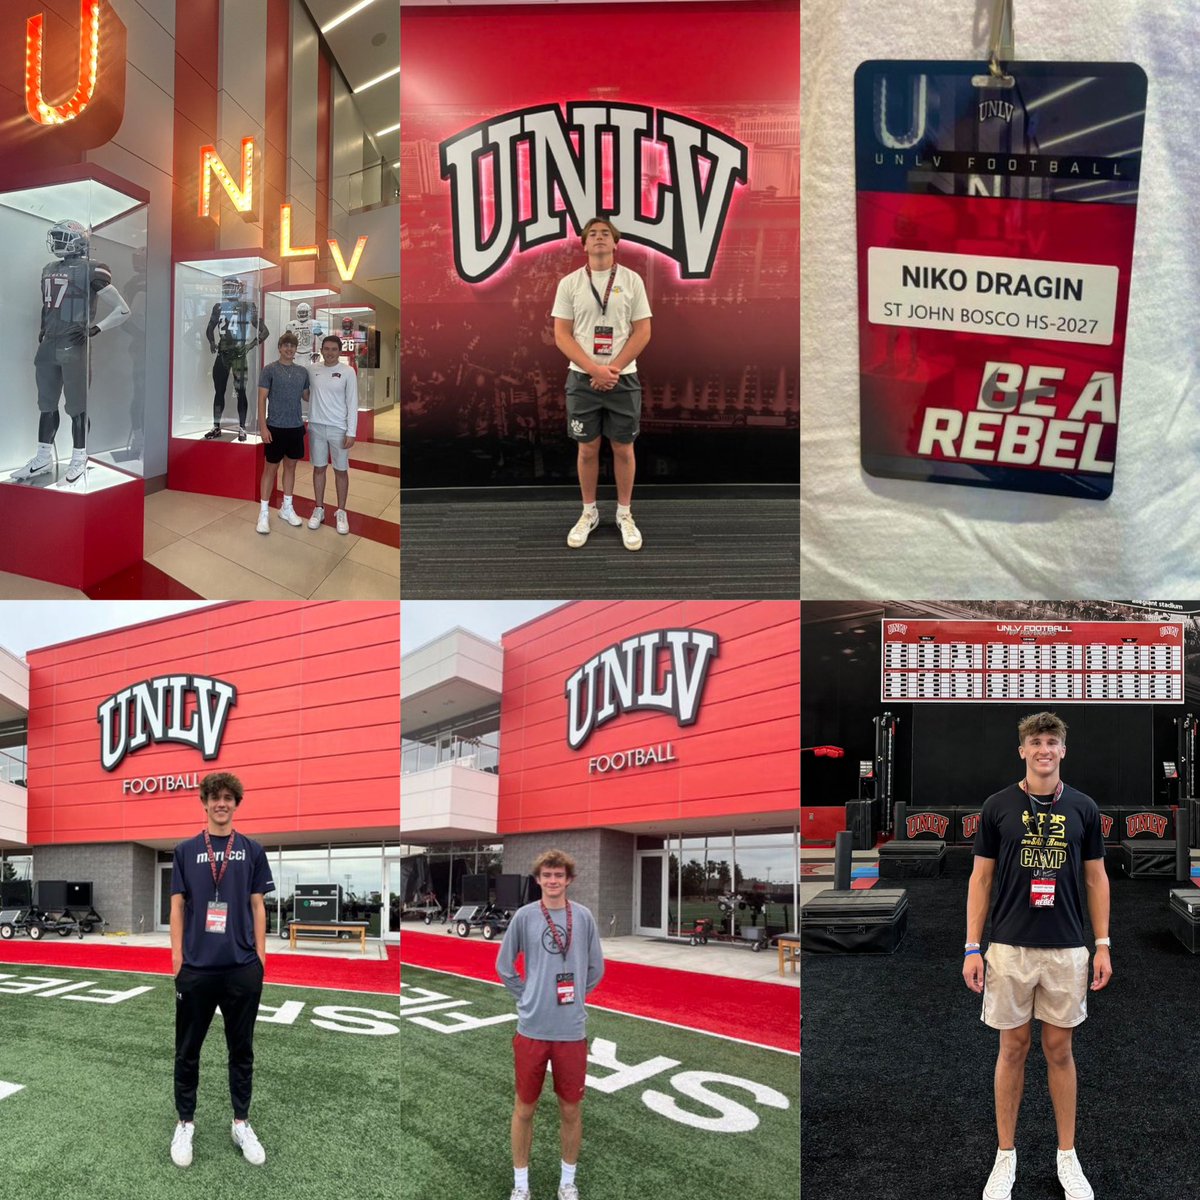 Wanted to thank @unlvfootball for hosting many of Chris Sailer Kicking’s Kicking & Punting prospects this past weekend. UNLV has built a great tradition of successful specialists. Who’s next? #TeamSailer